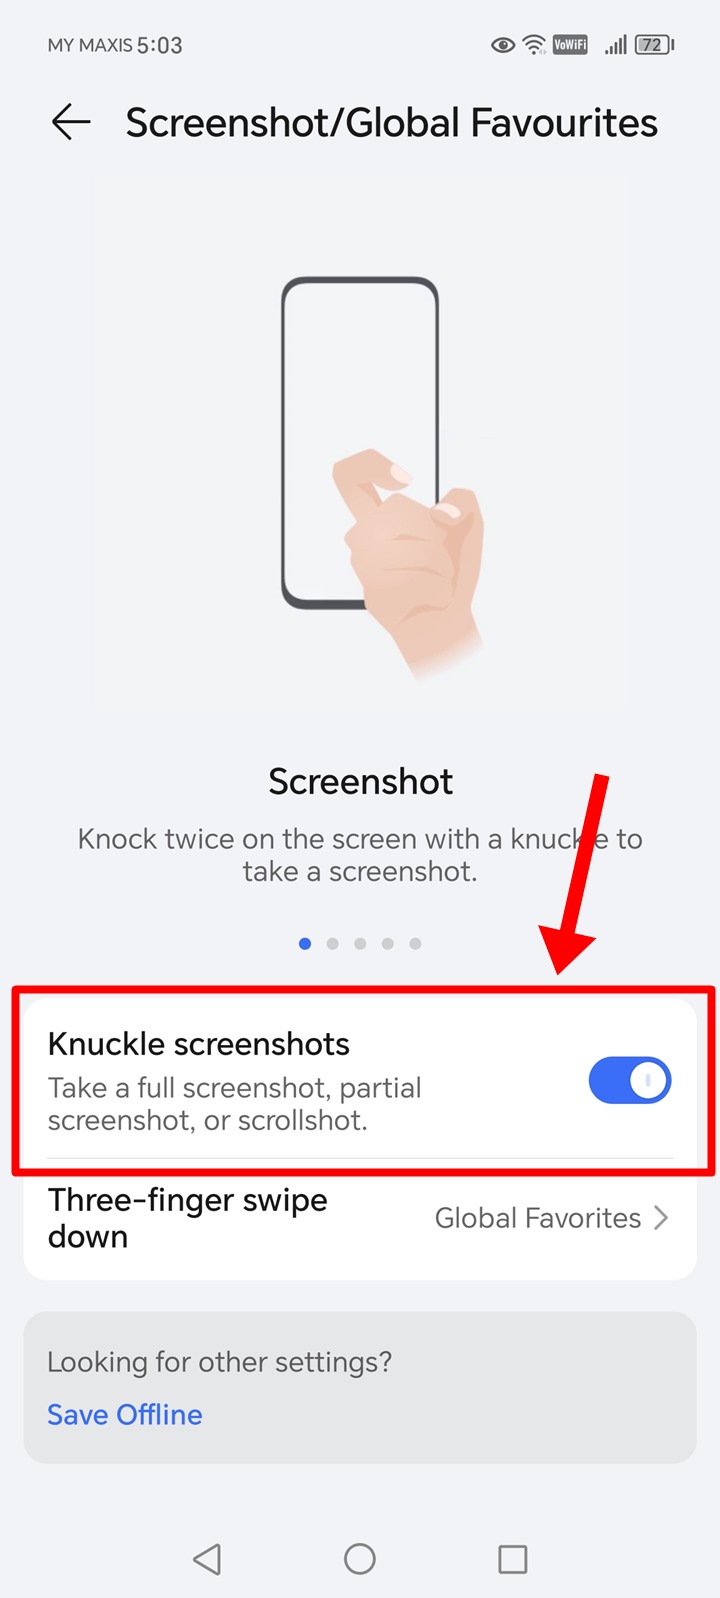 The "Knuckle Screenshots" option is toggled on for this Honor phone.